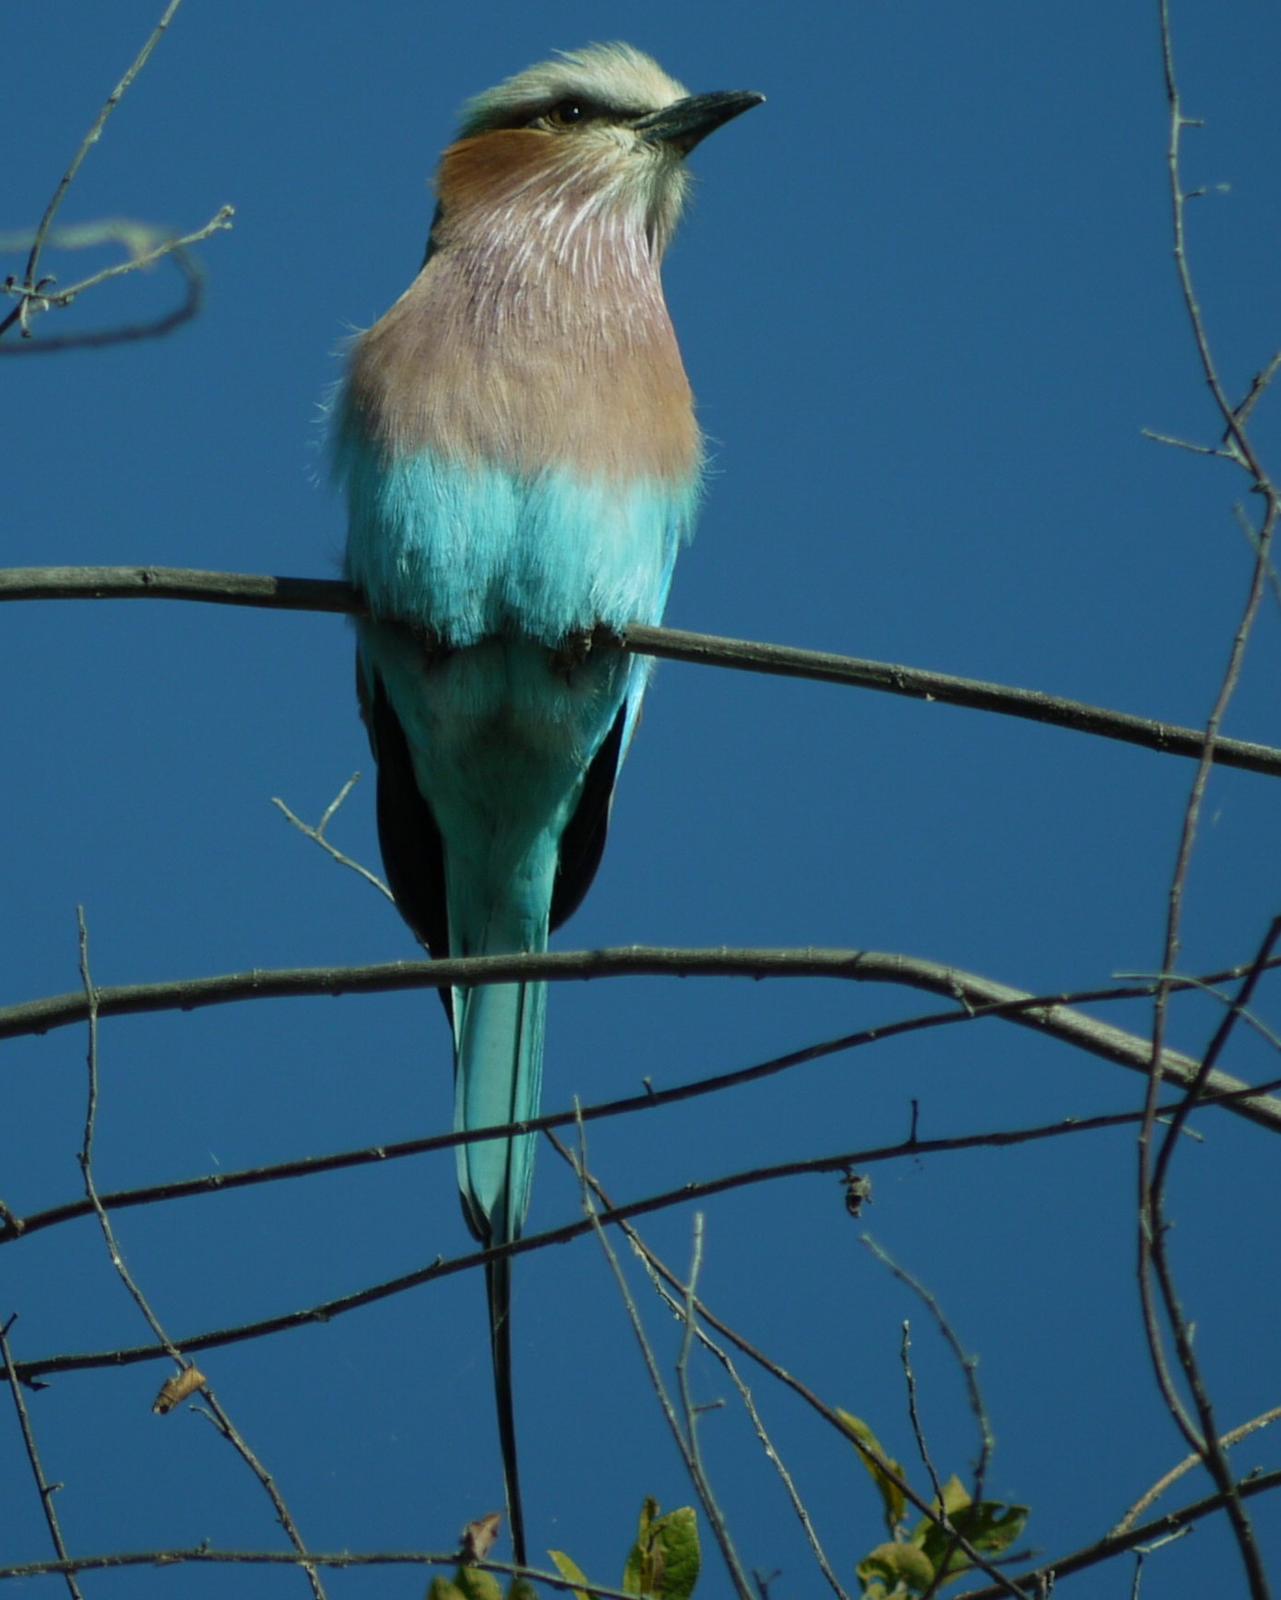 Lilac-breasted Roller Photo by Peter Lowe